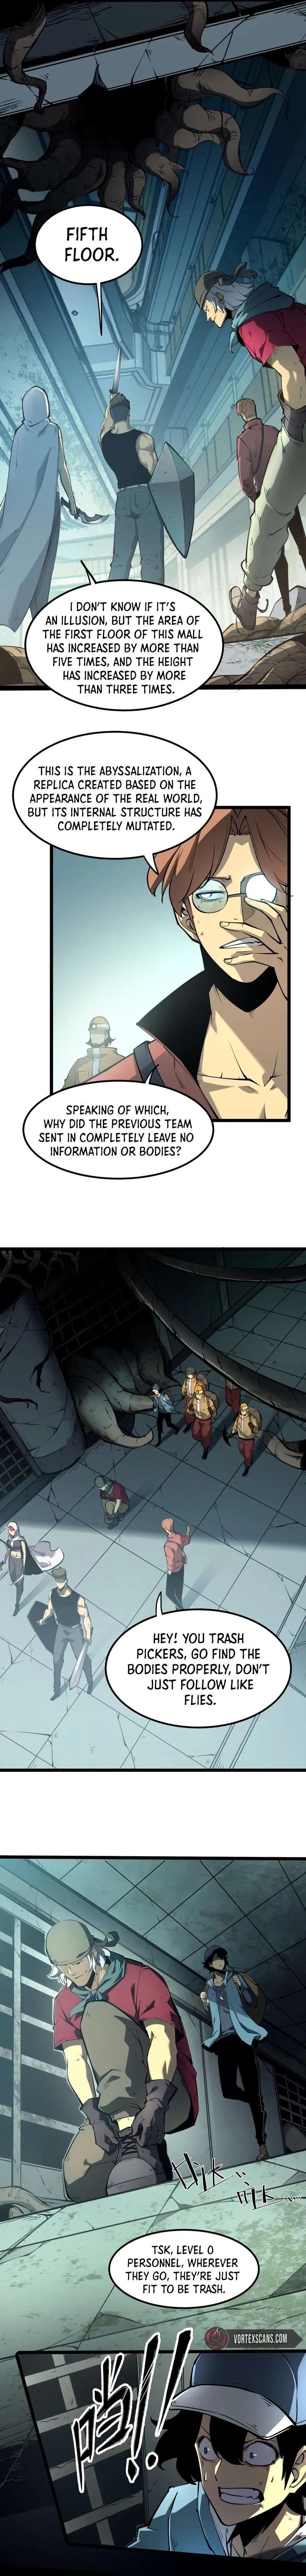 I Became The King by Scavenging Chapter 1 page 16